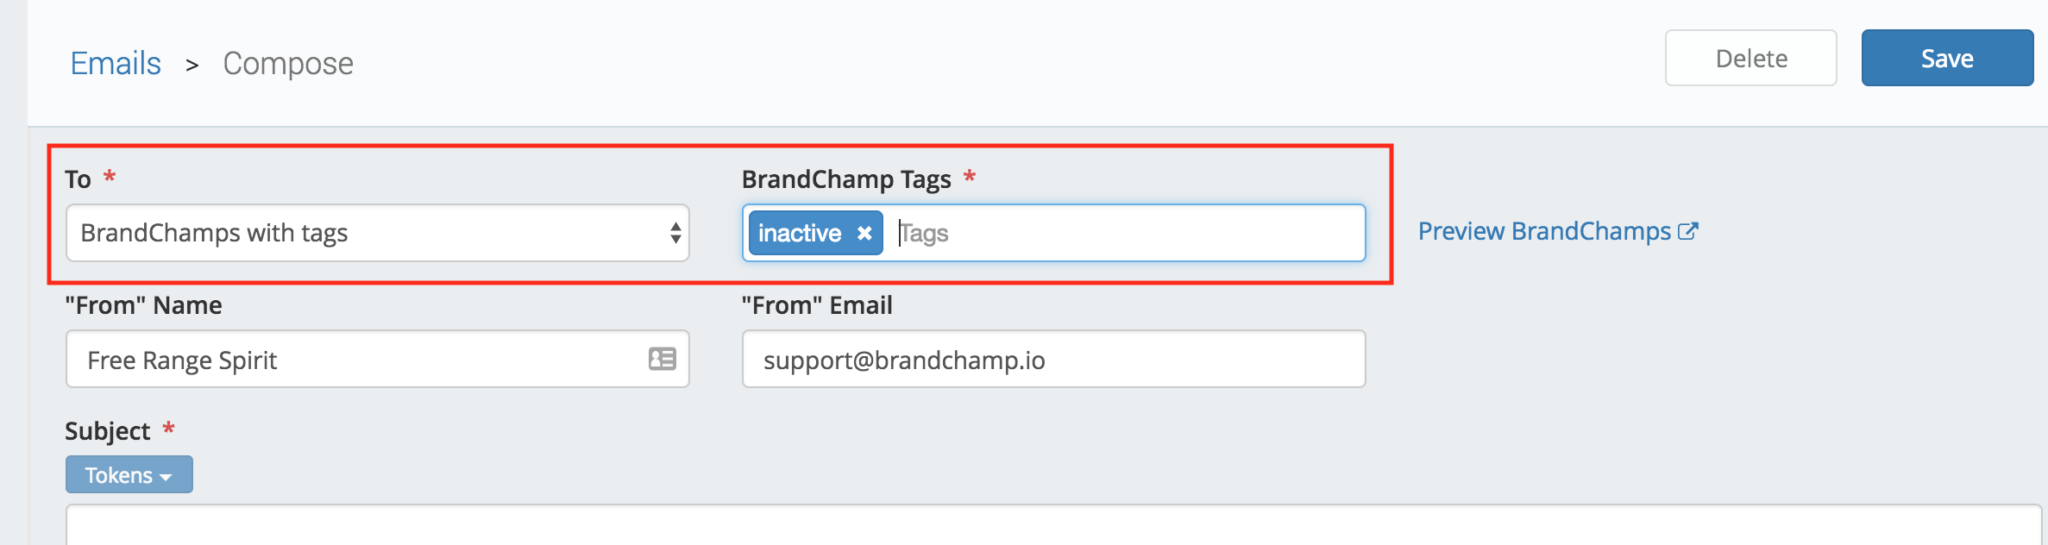 BrandChamp email user tags configuration